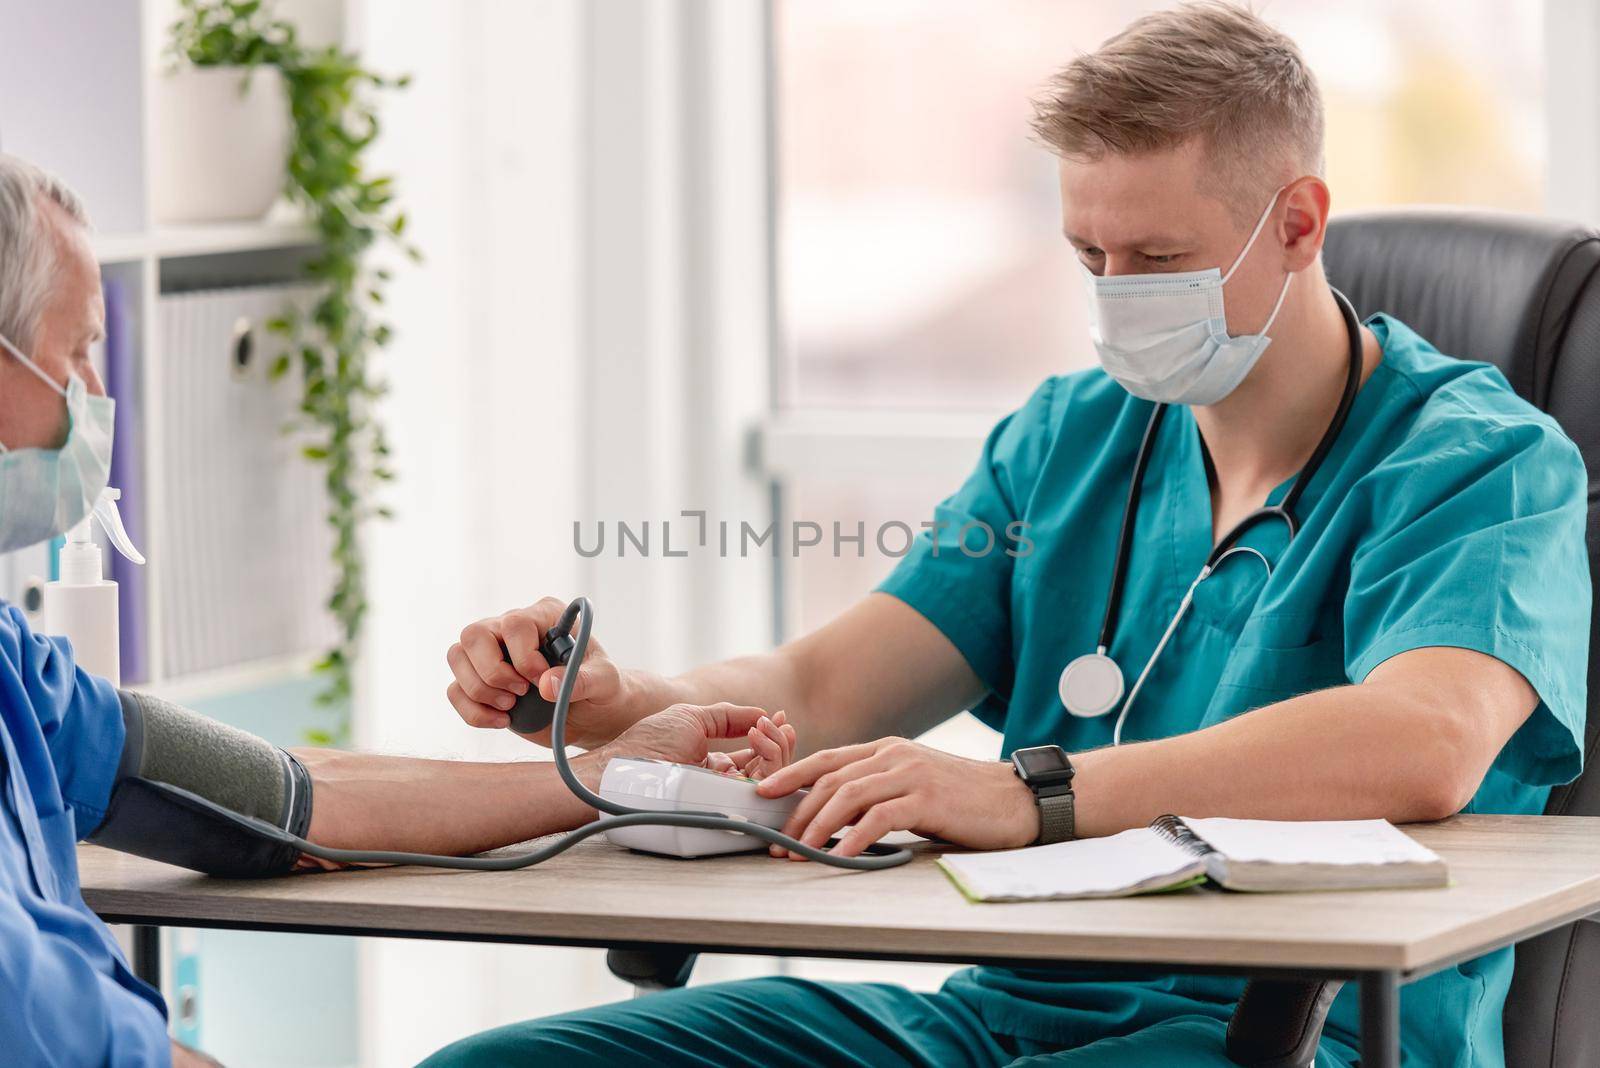 Therapist measuring blood pressure of patient during appointment in clinic